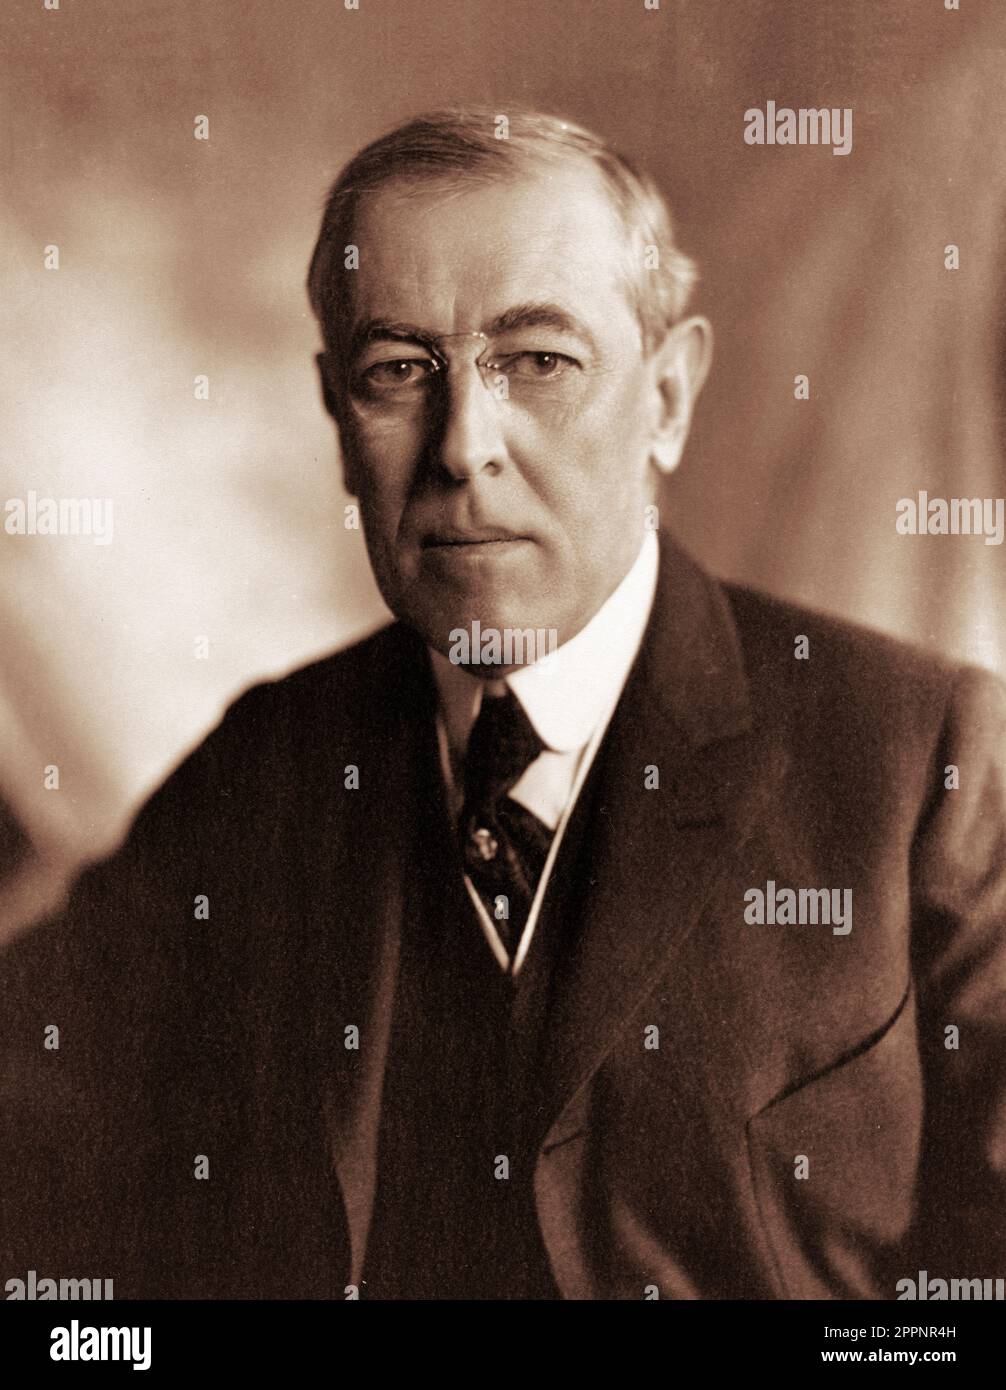 Woodrow Wilson (1856-1924). Portrait of the 28th President of the USA, Thomas Woodrow Wilson, by Harris and Ewing, c. 1912 Stock Photo